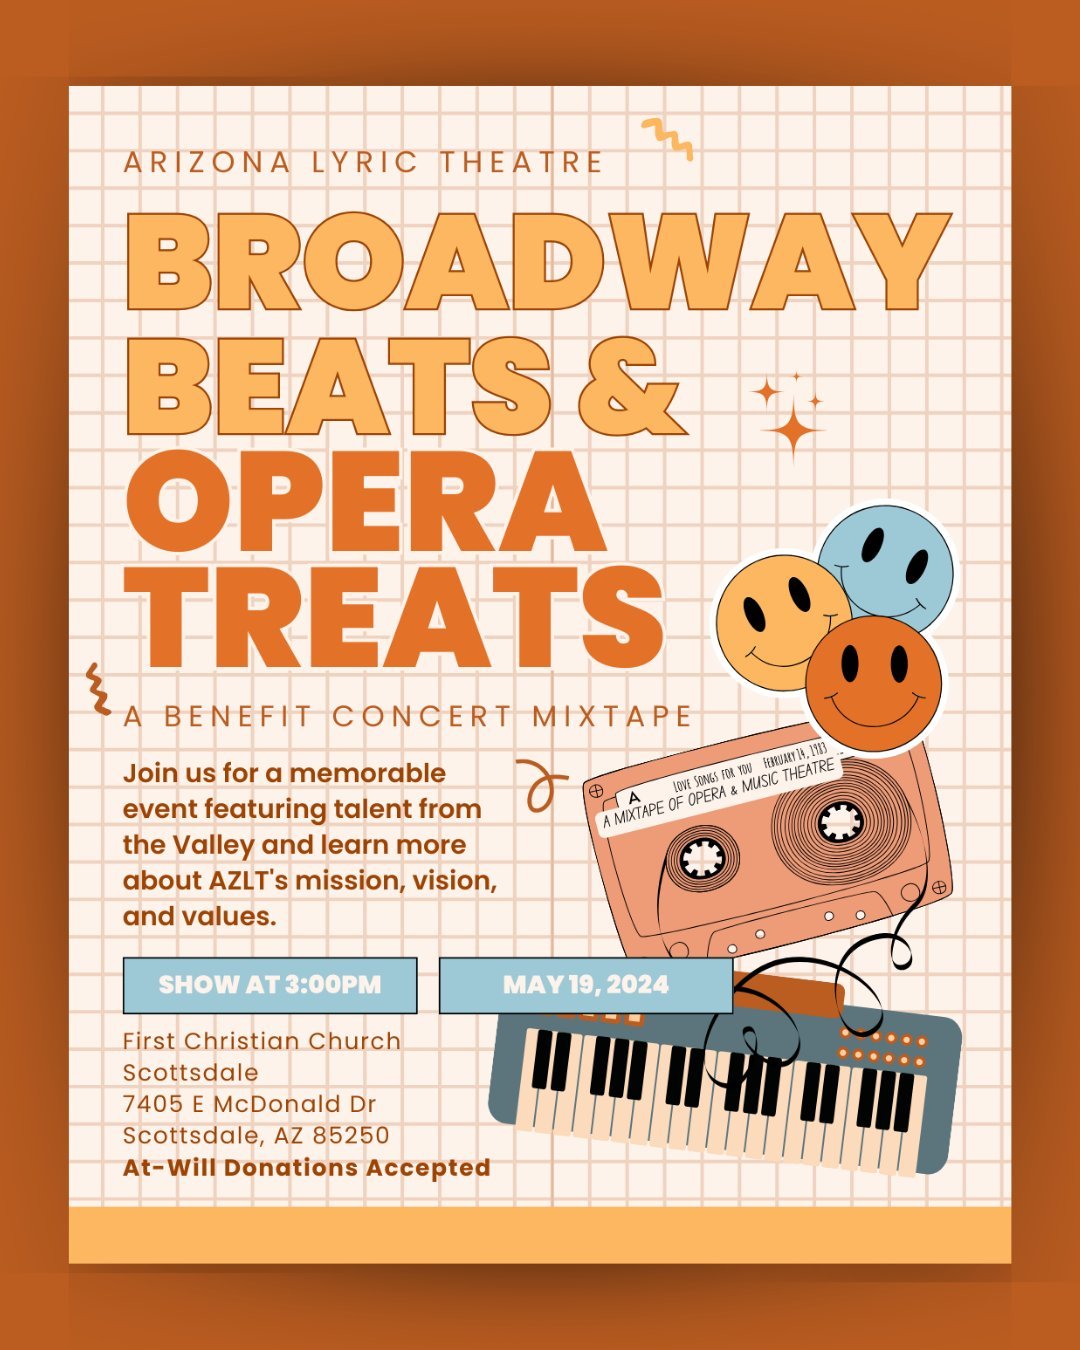 🎶 Save the date for an enchanting afternoon of music and community at our &quot;Broadway Beats &amp; Opera Treats&quot; concert on May 19th, 3:00 pm, First Christian Church Scottsdale. Delight in captivating performances, support AZLT's mission, and